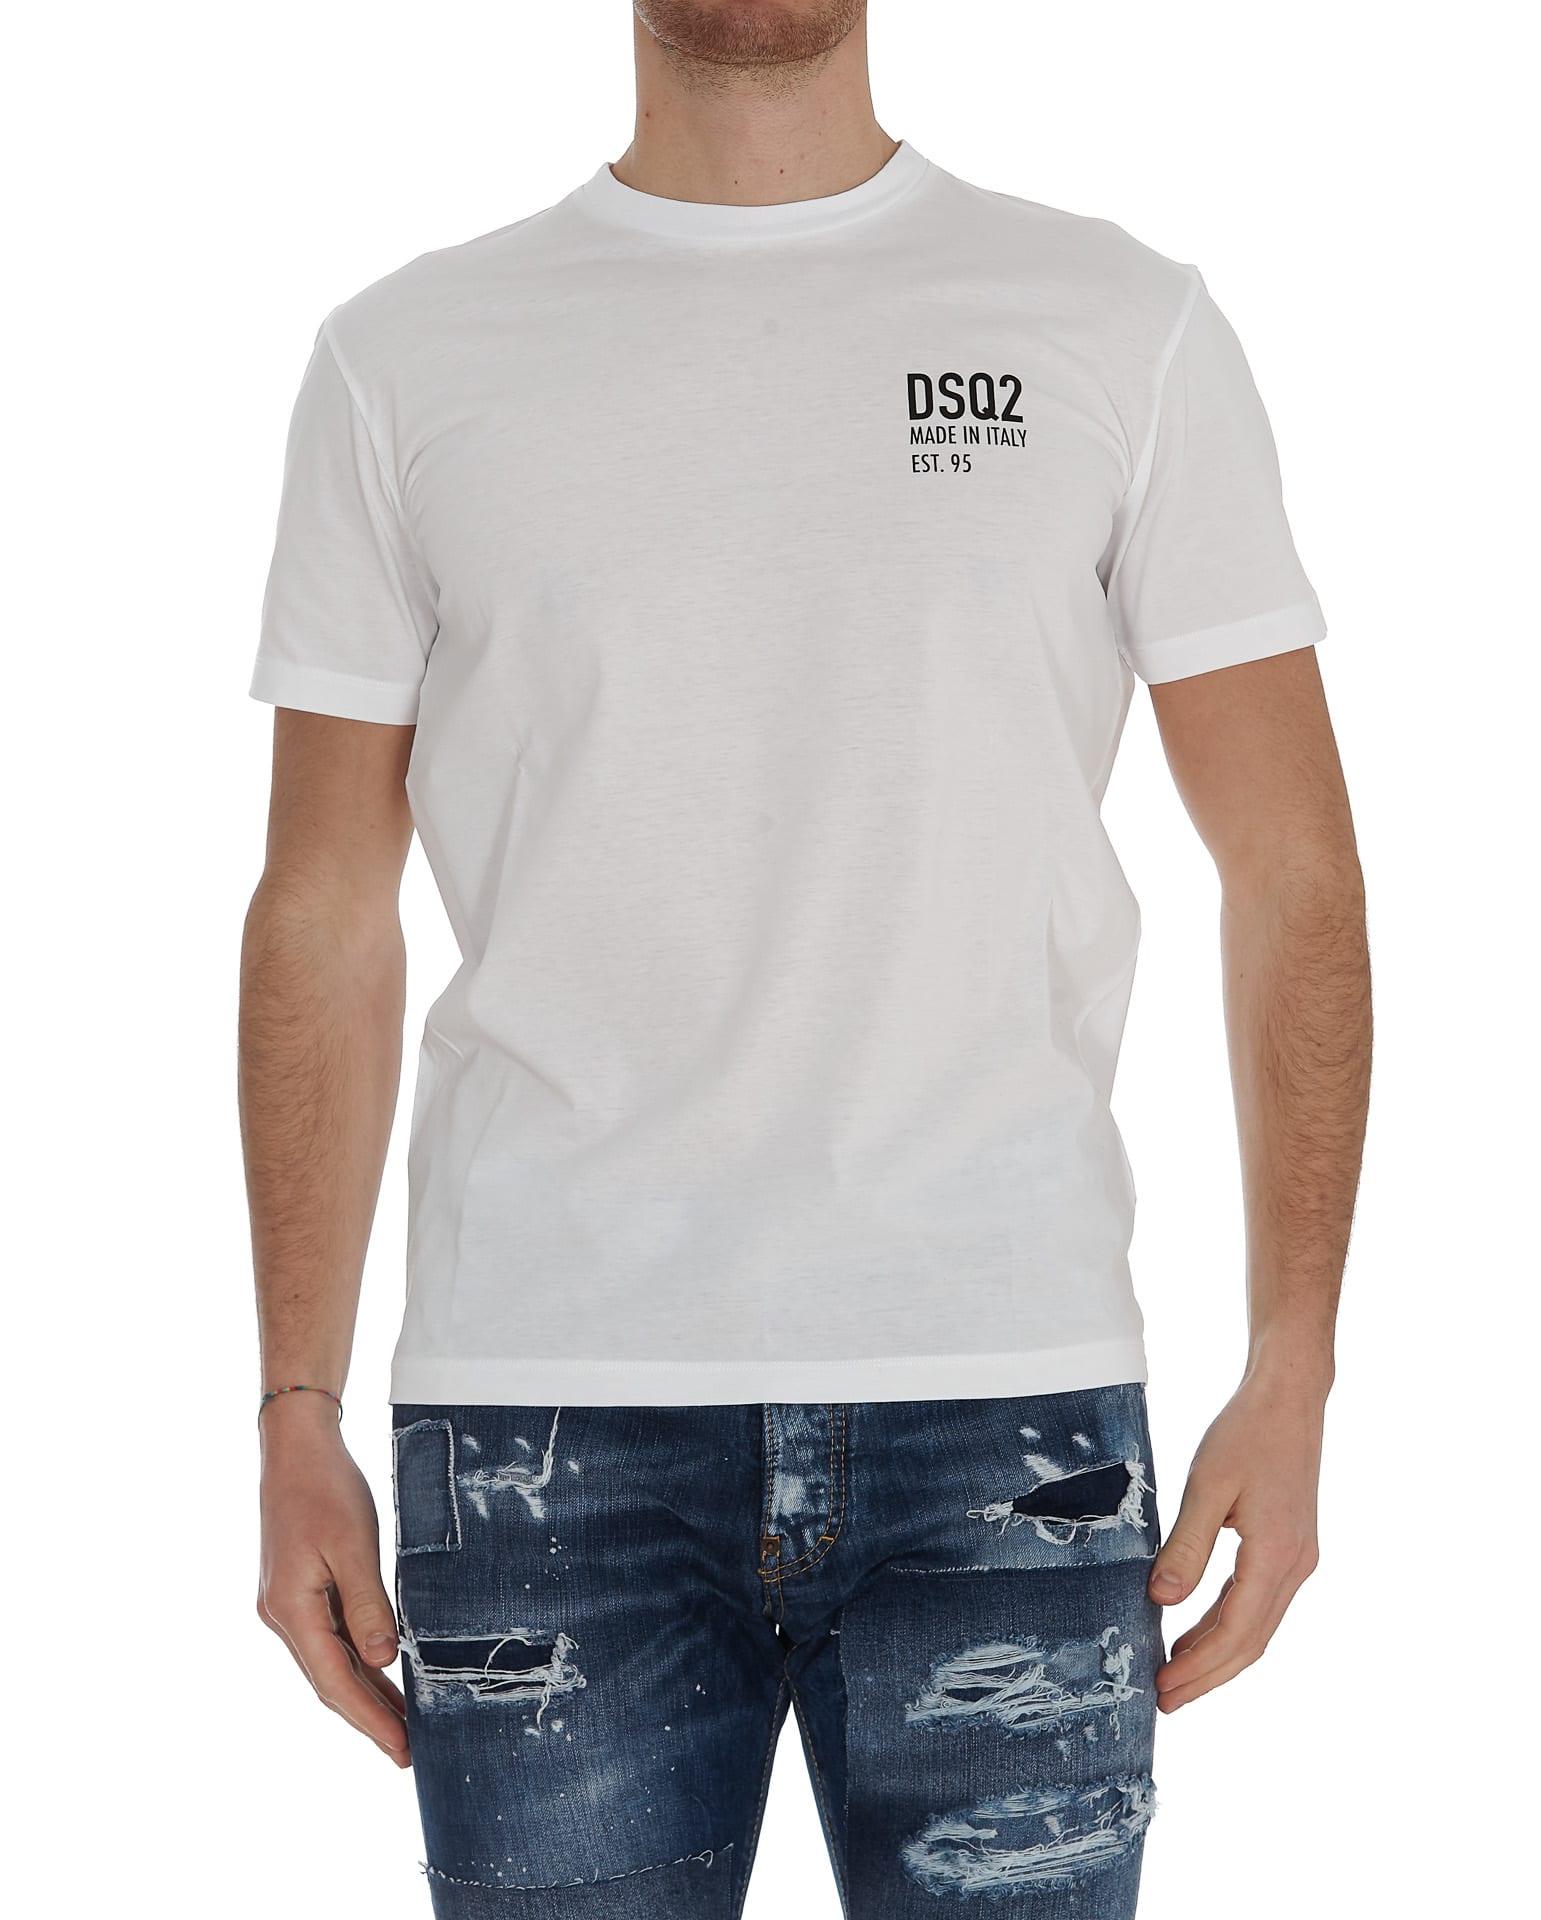 DSQUARED2 MADE IN ITALY T-SHIRT,S71GD1018 S23009100